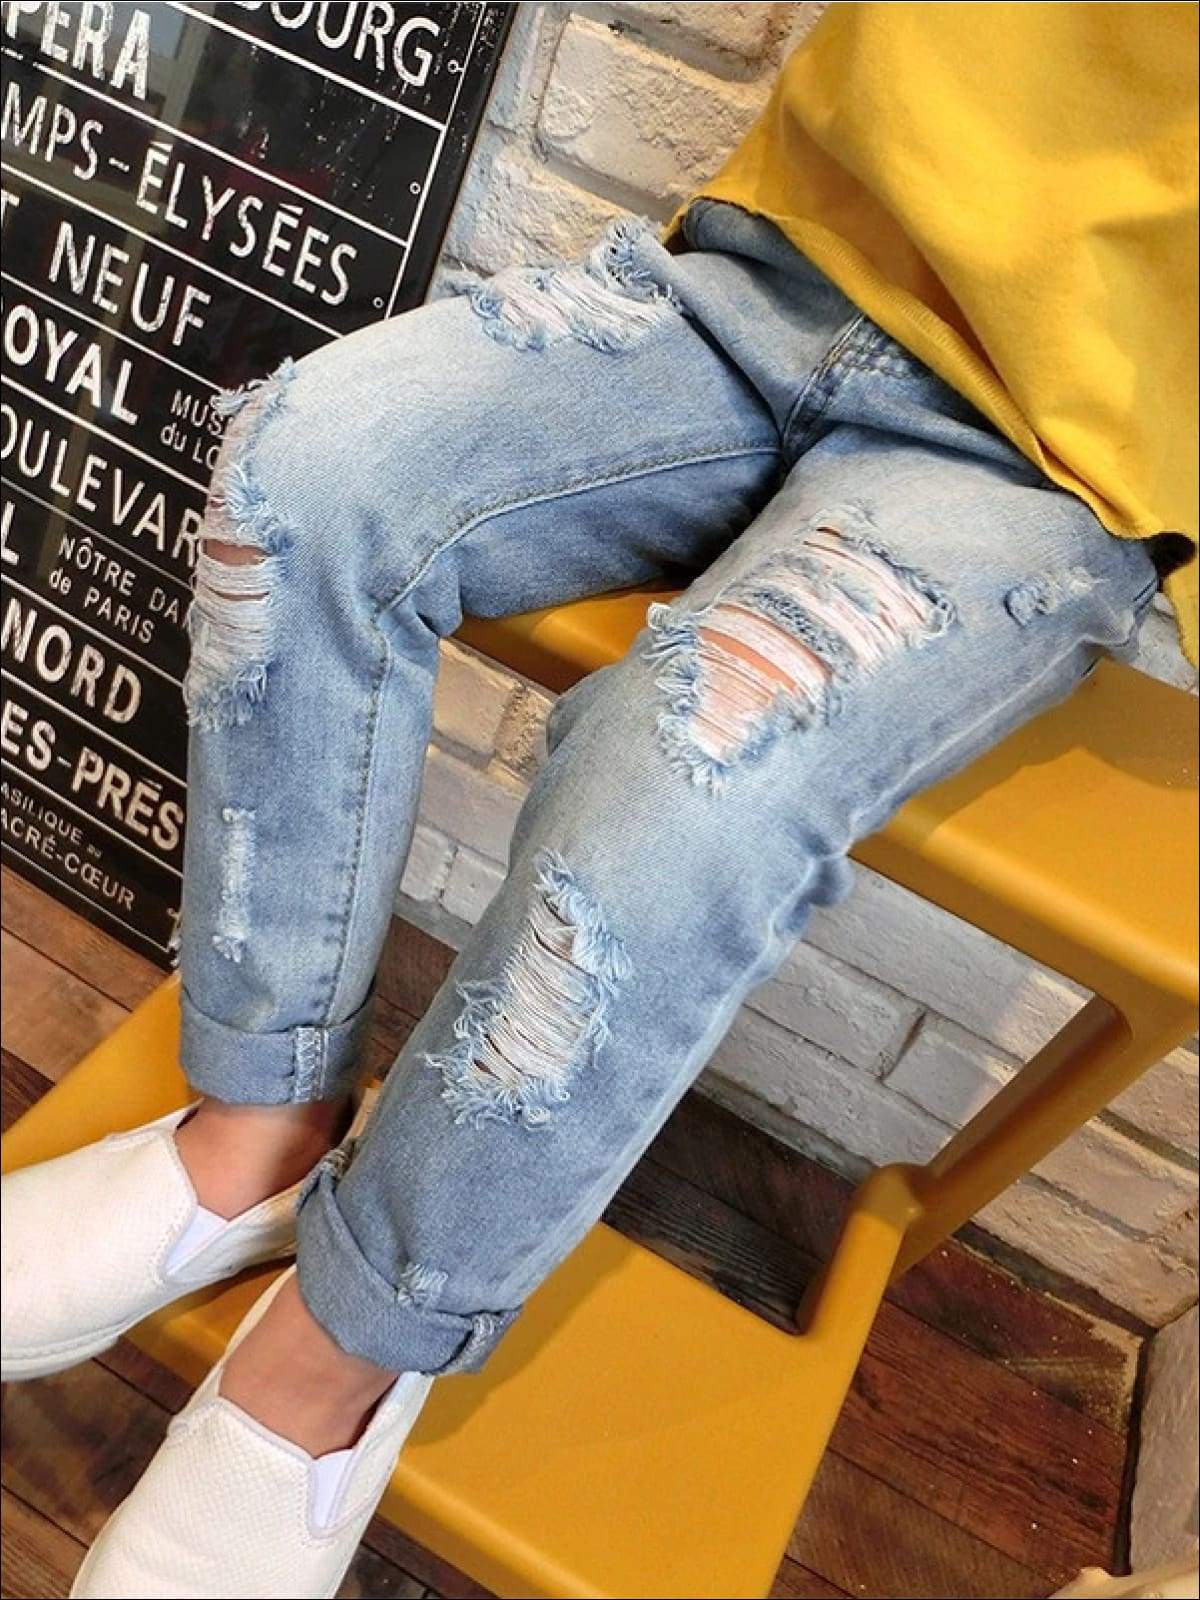 Jeans For Girls, Ripped Jeans For Girls